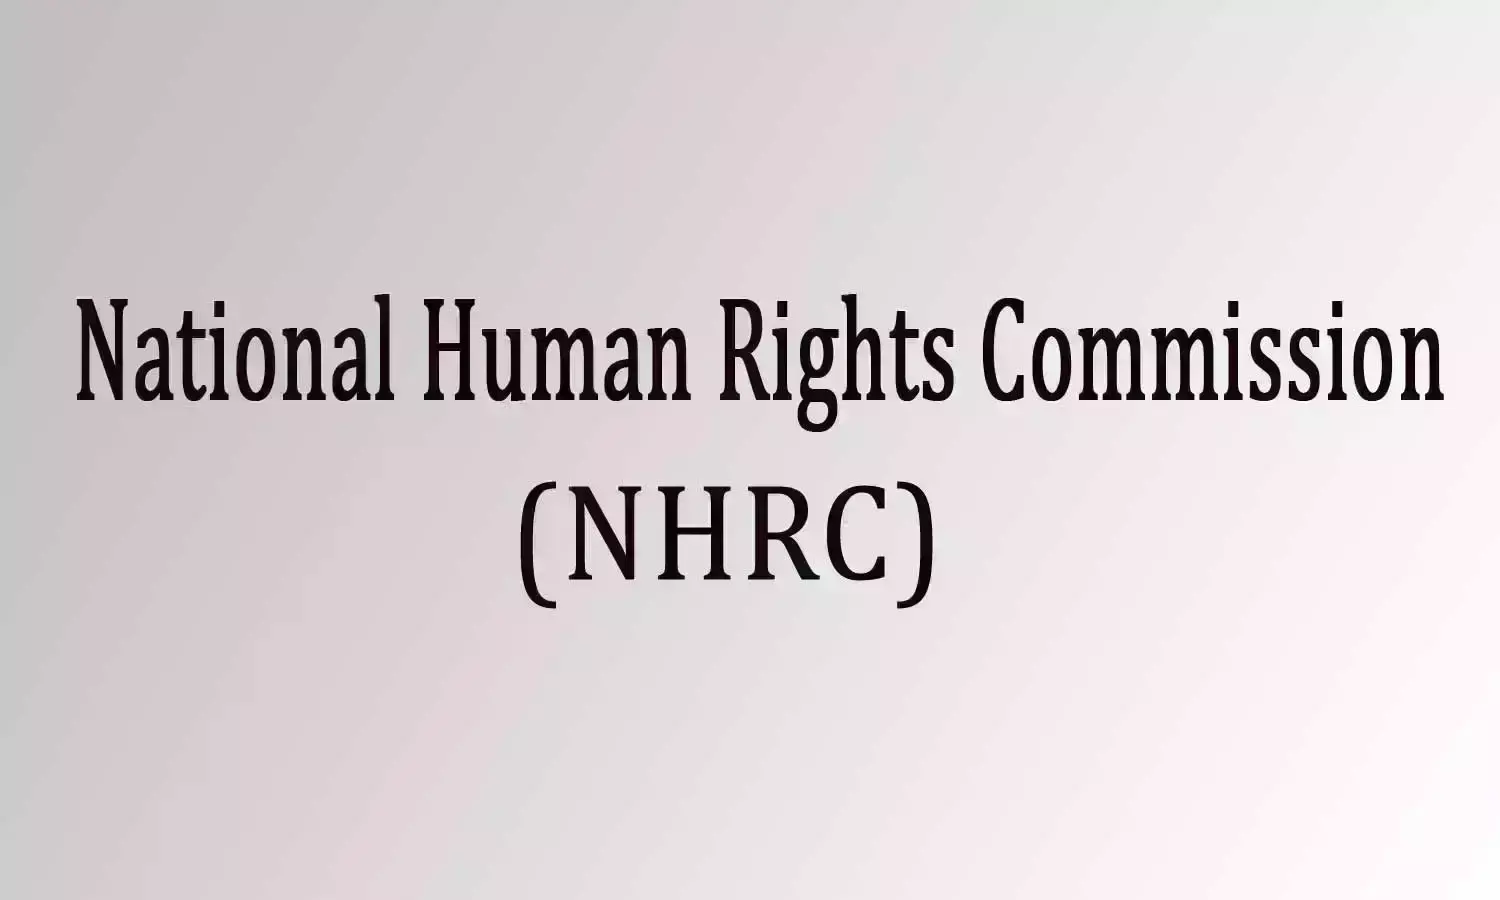 Black fungus deaths in India: NHRC directs Health Ministry to act immediately, submit report